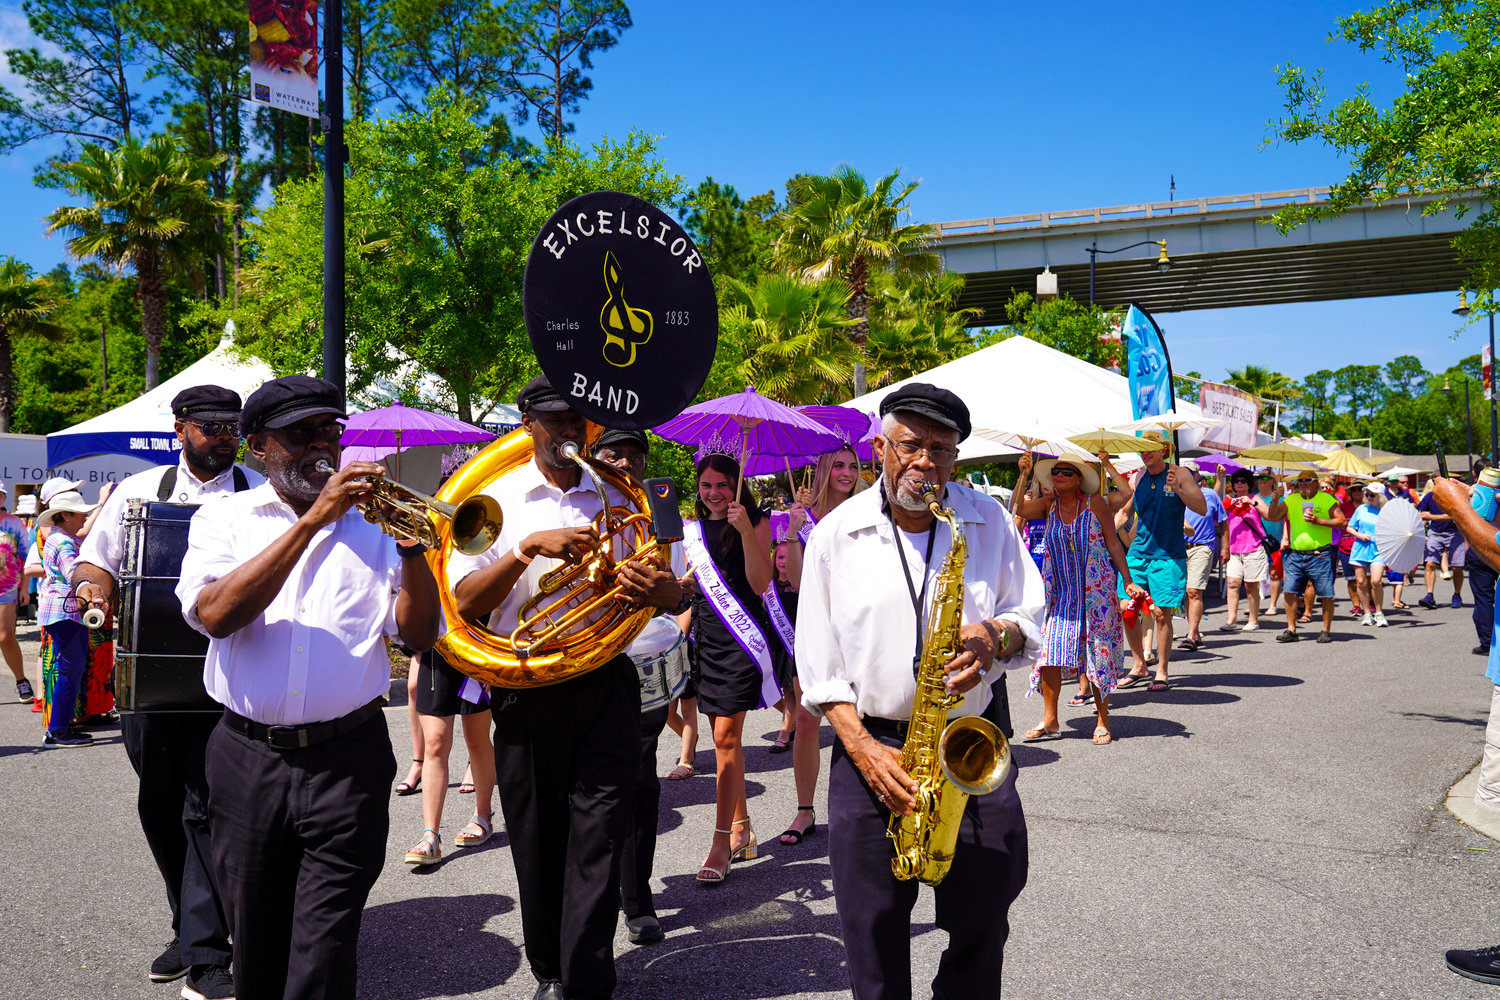 The Excelsior Band leads the second line through the Waterway Village.